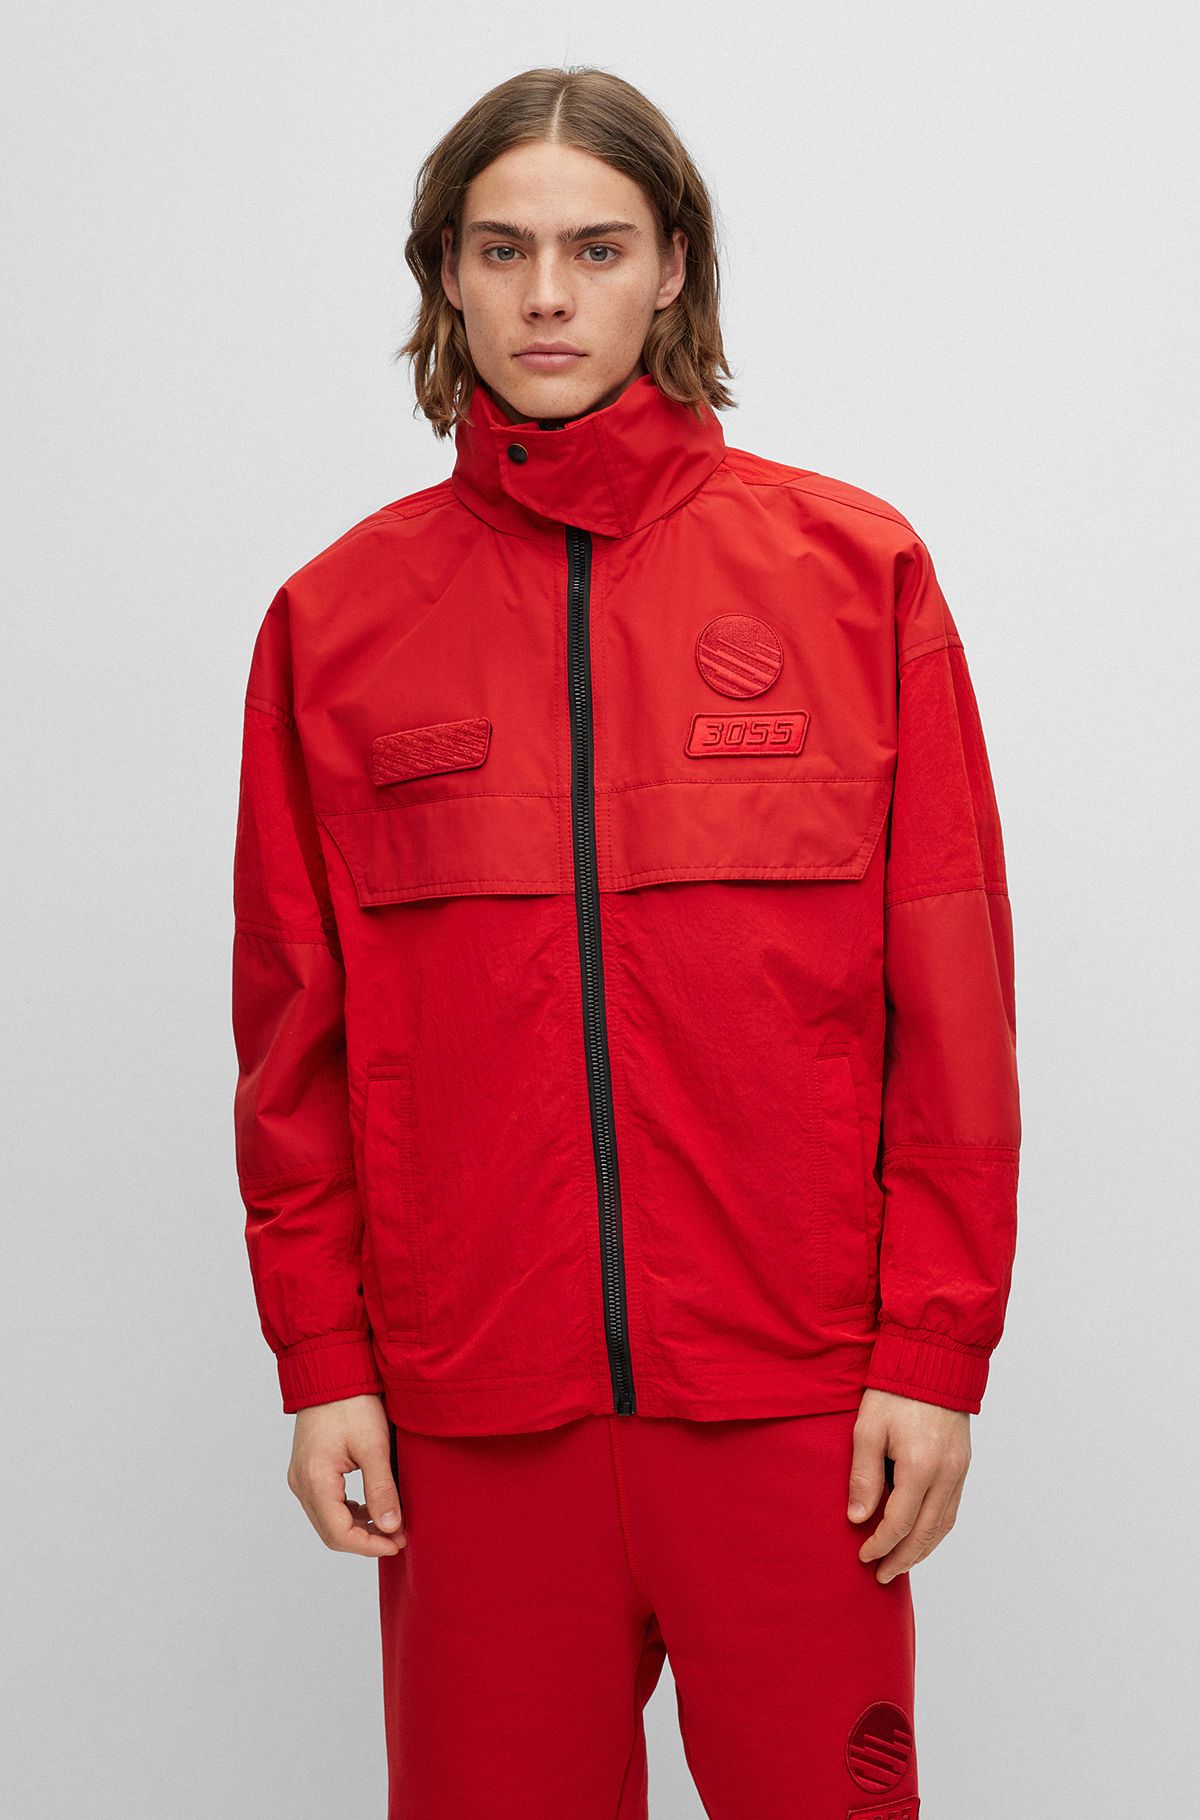 Oversized-fit zipped jacket with racing-inspired details, Red